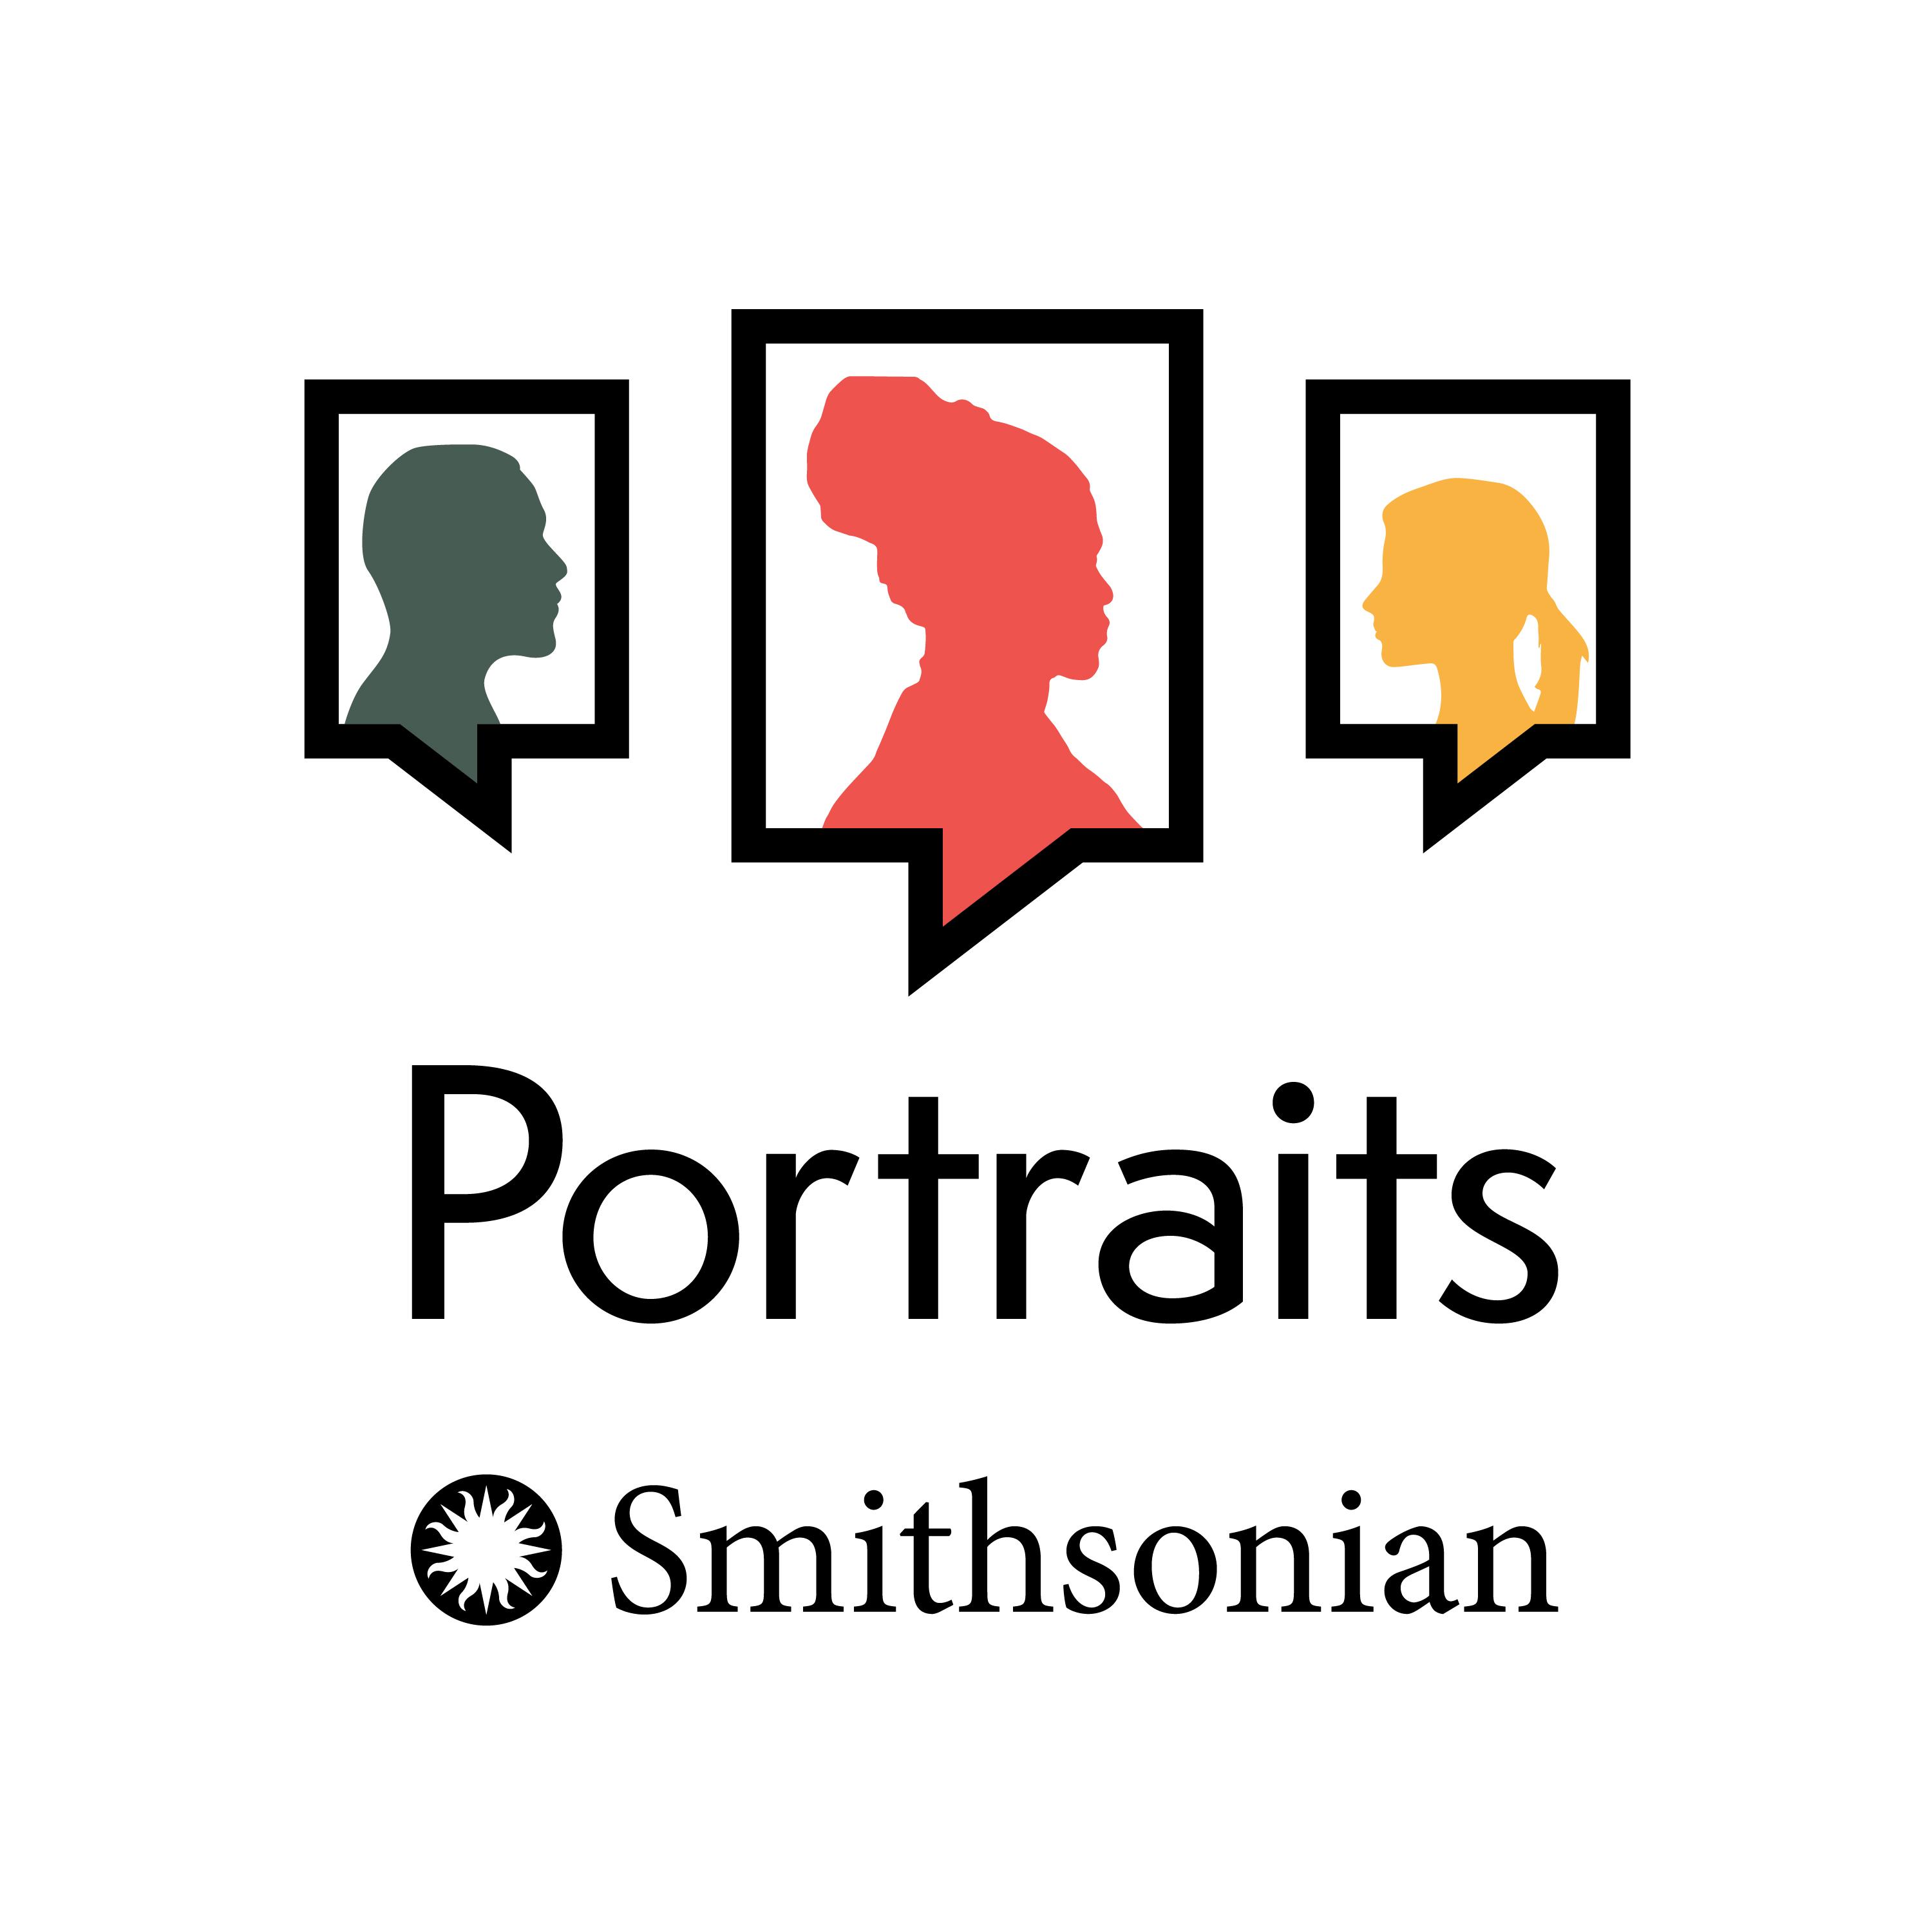 Thumbnail for "Coming Soon: Portraits".